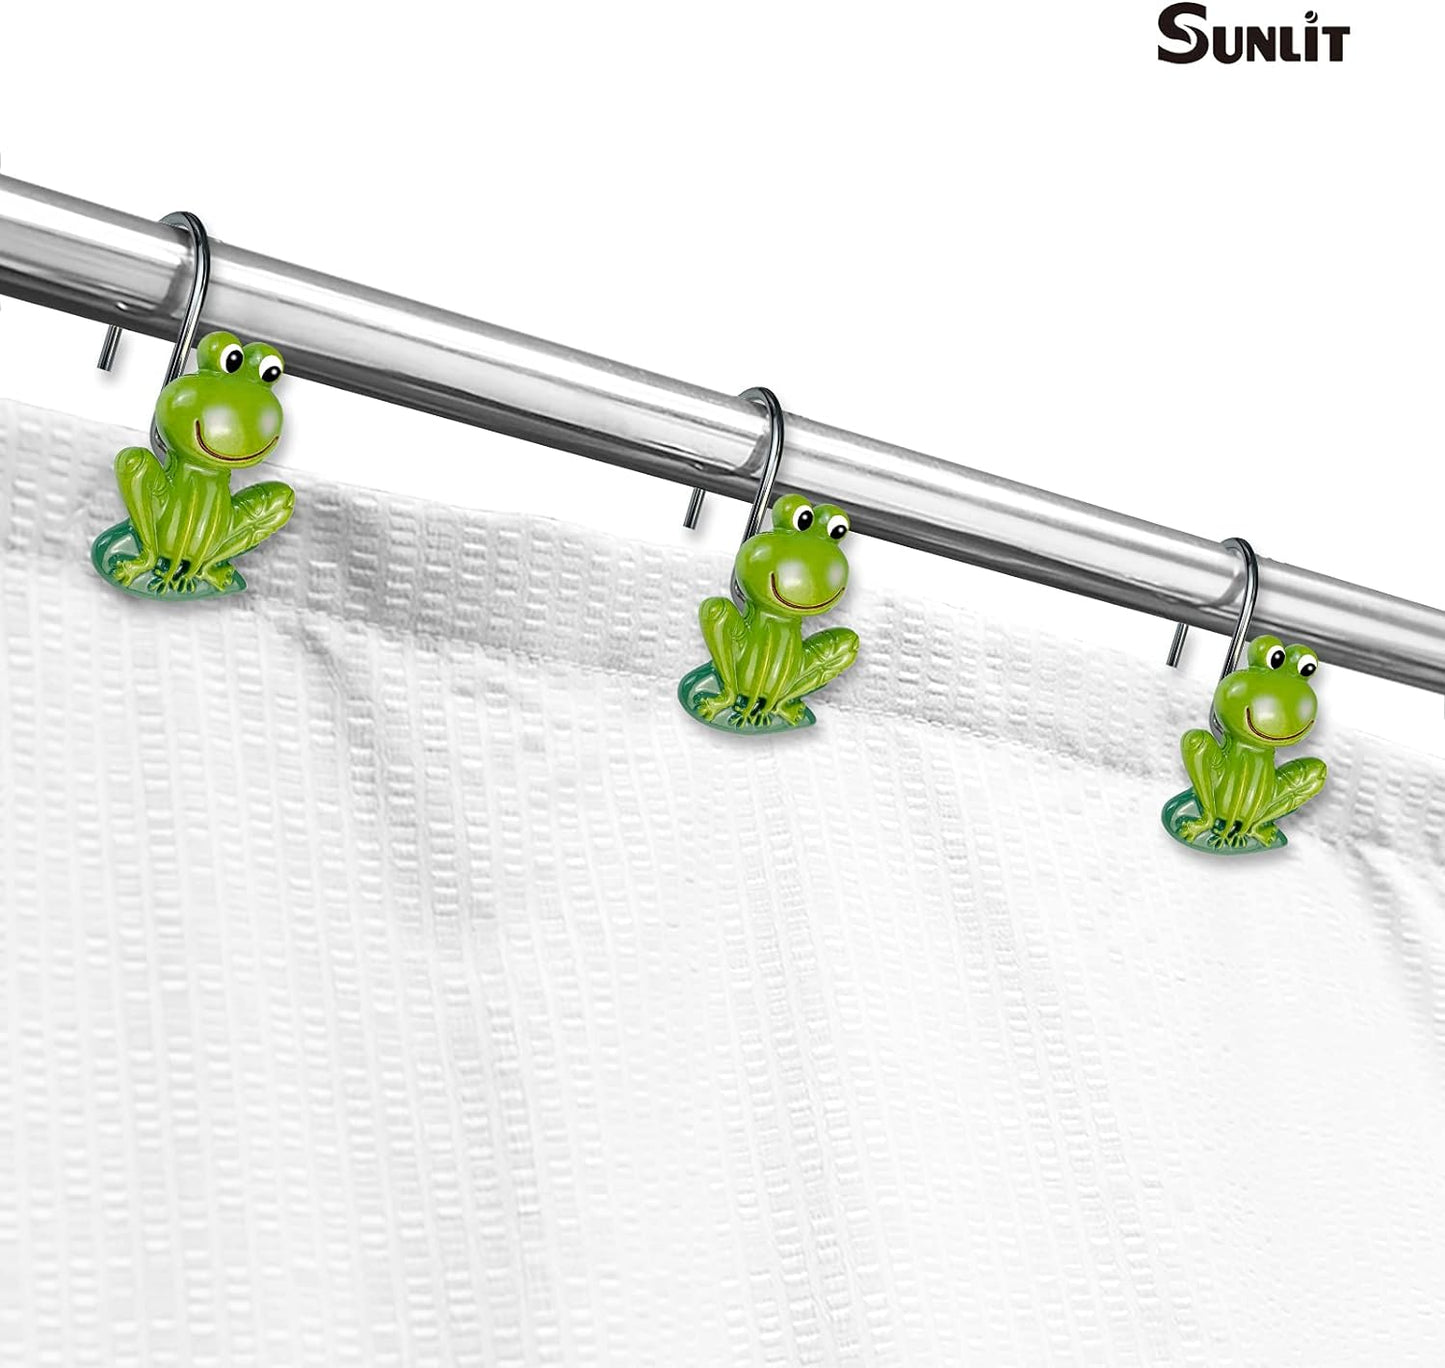 Sunlit Rustic Decorative Shower Curtain Hooks for Kids, Frog Shower Curtain Rings, Cabin Green Shower Curtain Hooks, Resin, Farmhouse Bathroom Decoration for Kids- 12 Pack